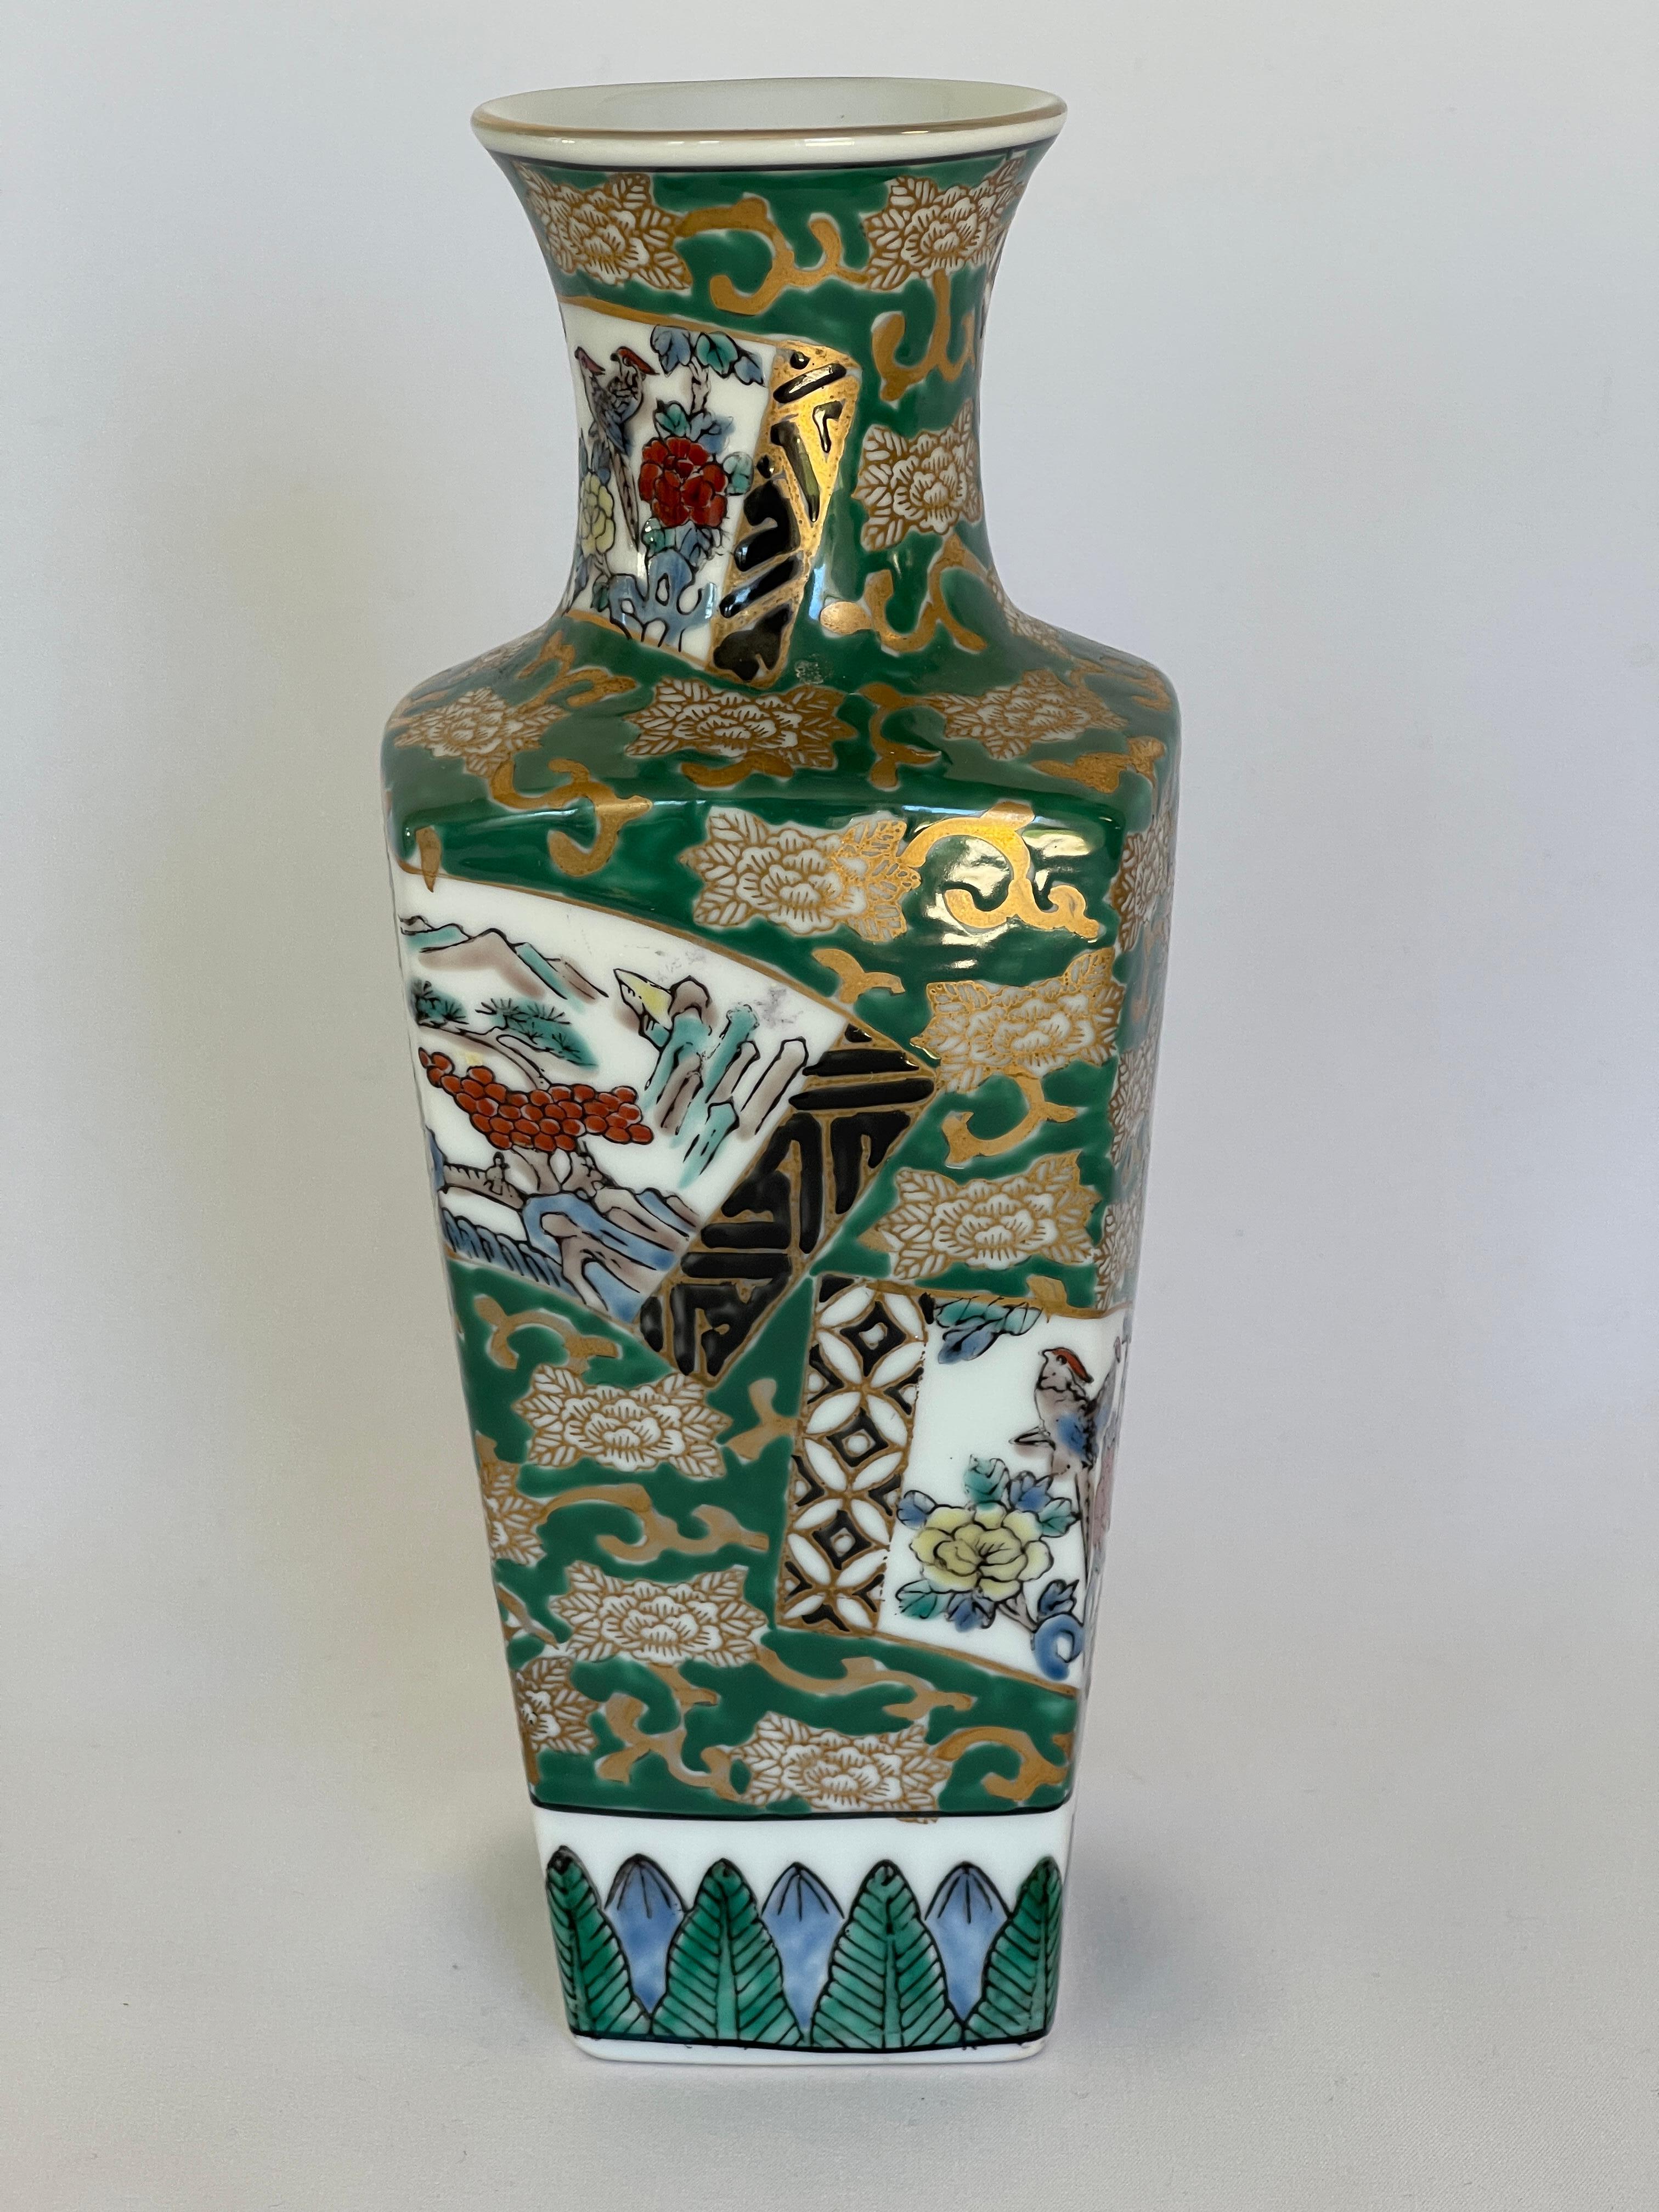 Graceful hand decorated Japanese vase with traditional motifs and gold rimmed top., c. 1960's. Signed on bottom, Gold Imari.